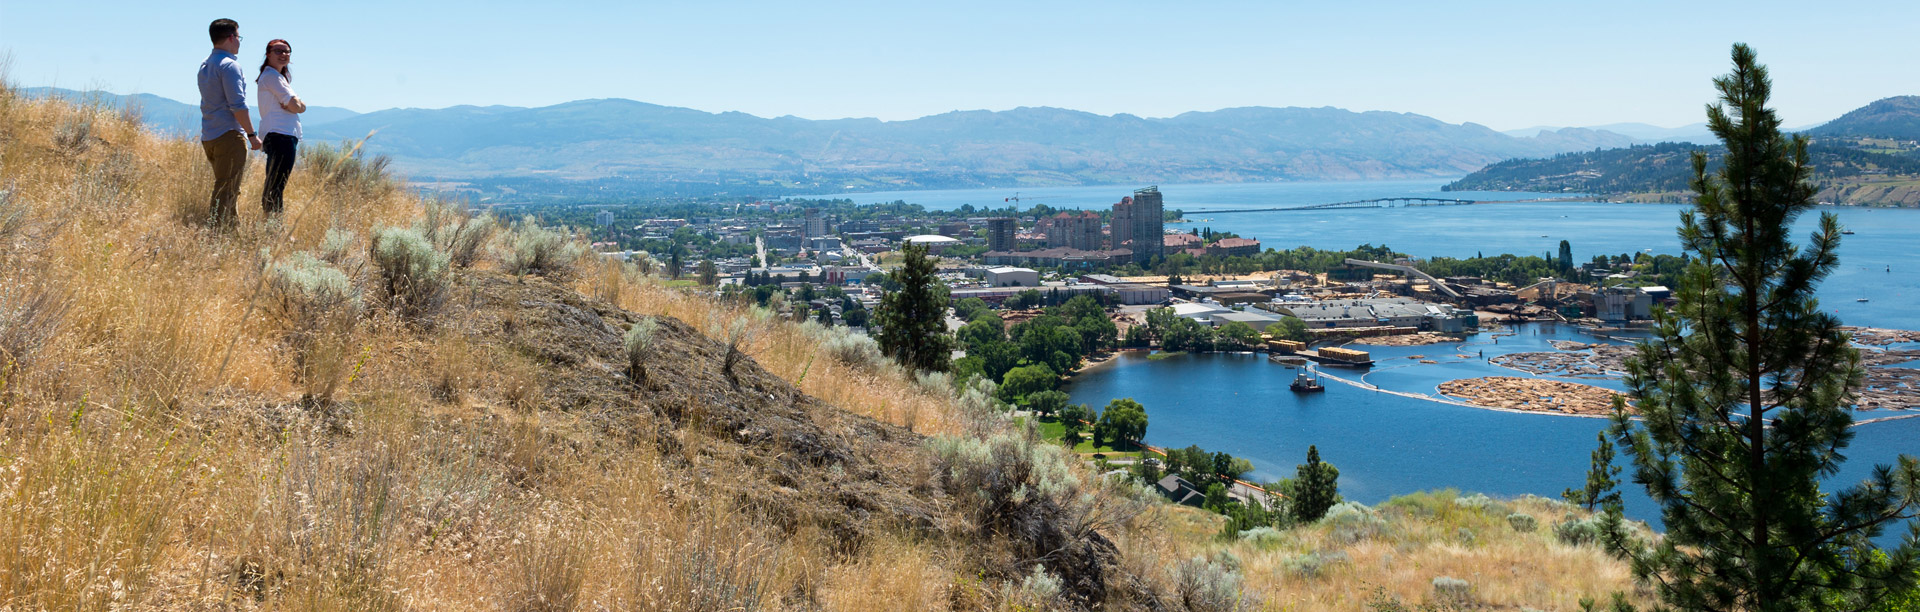 View over downtown Kelowna